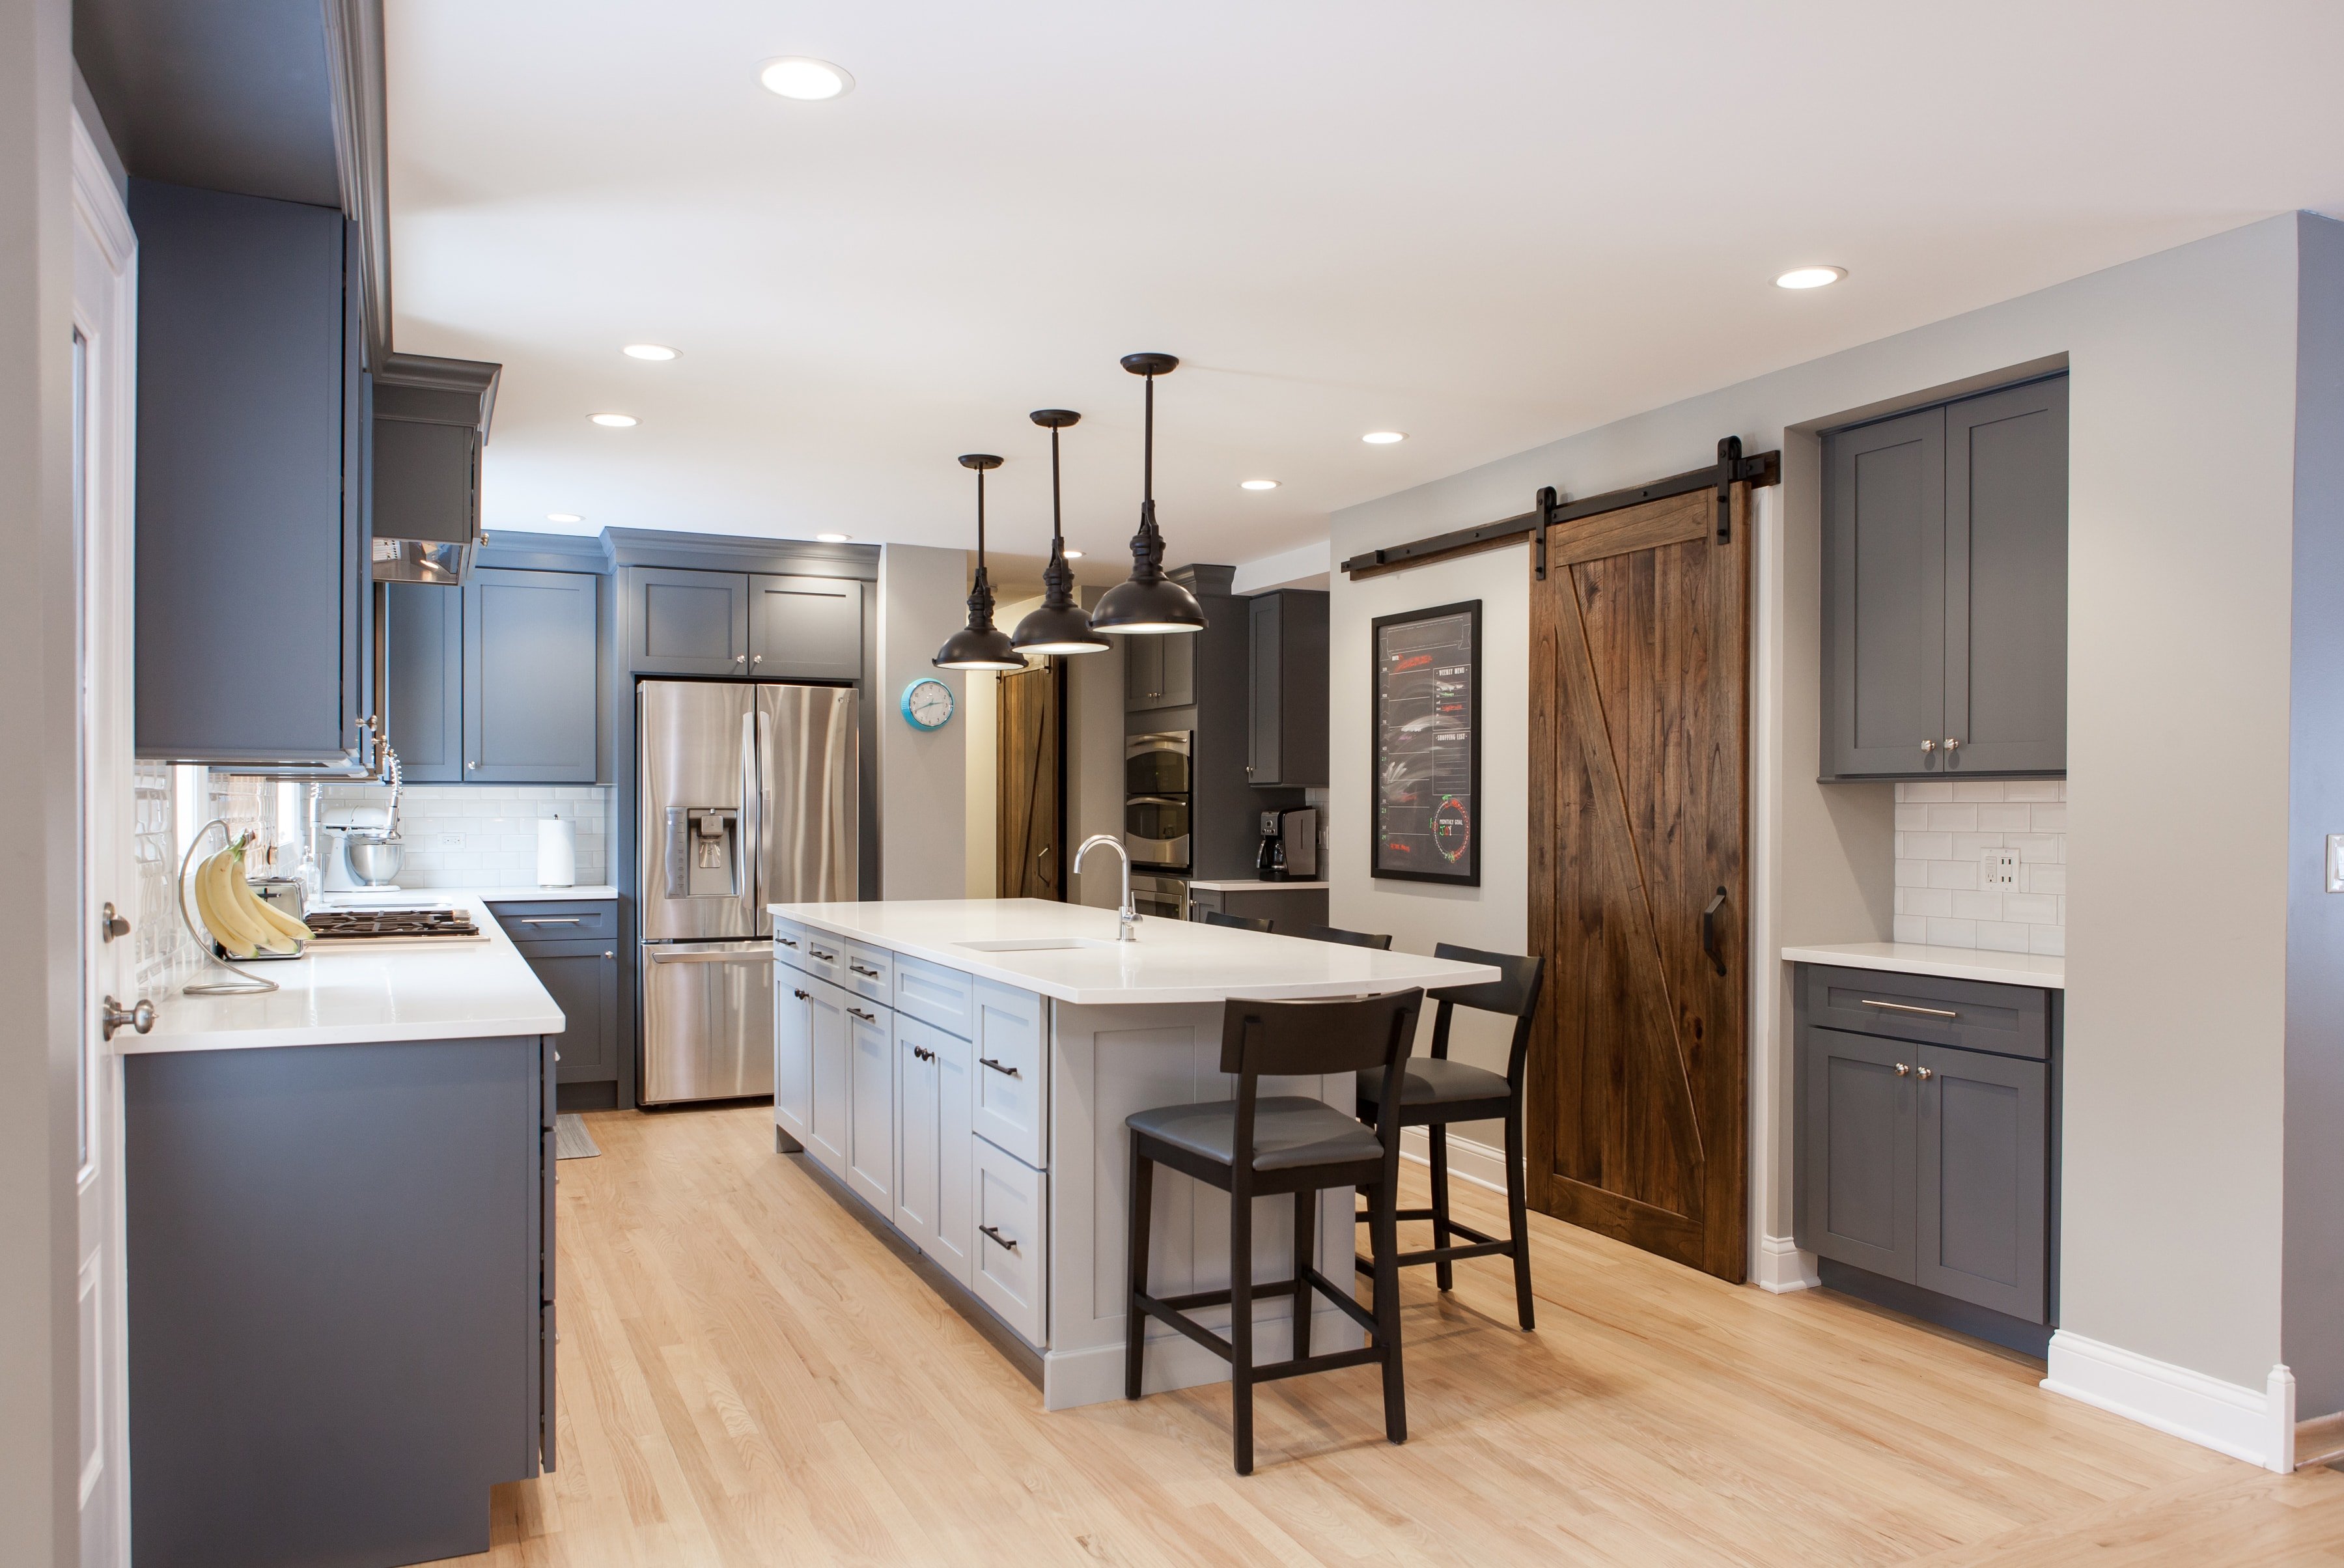 Kitchen Remodel Cost In Chicago, How Much Does It Cost To Refurbish A Kitchen